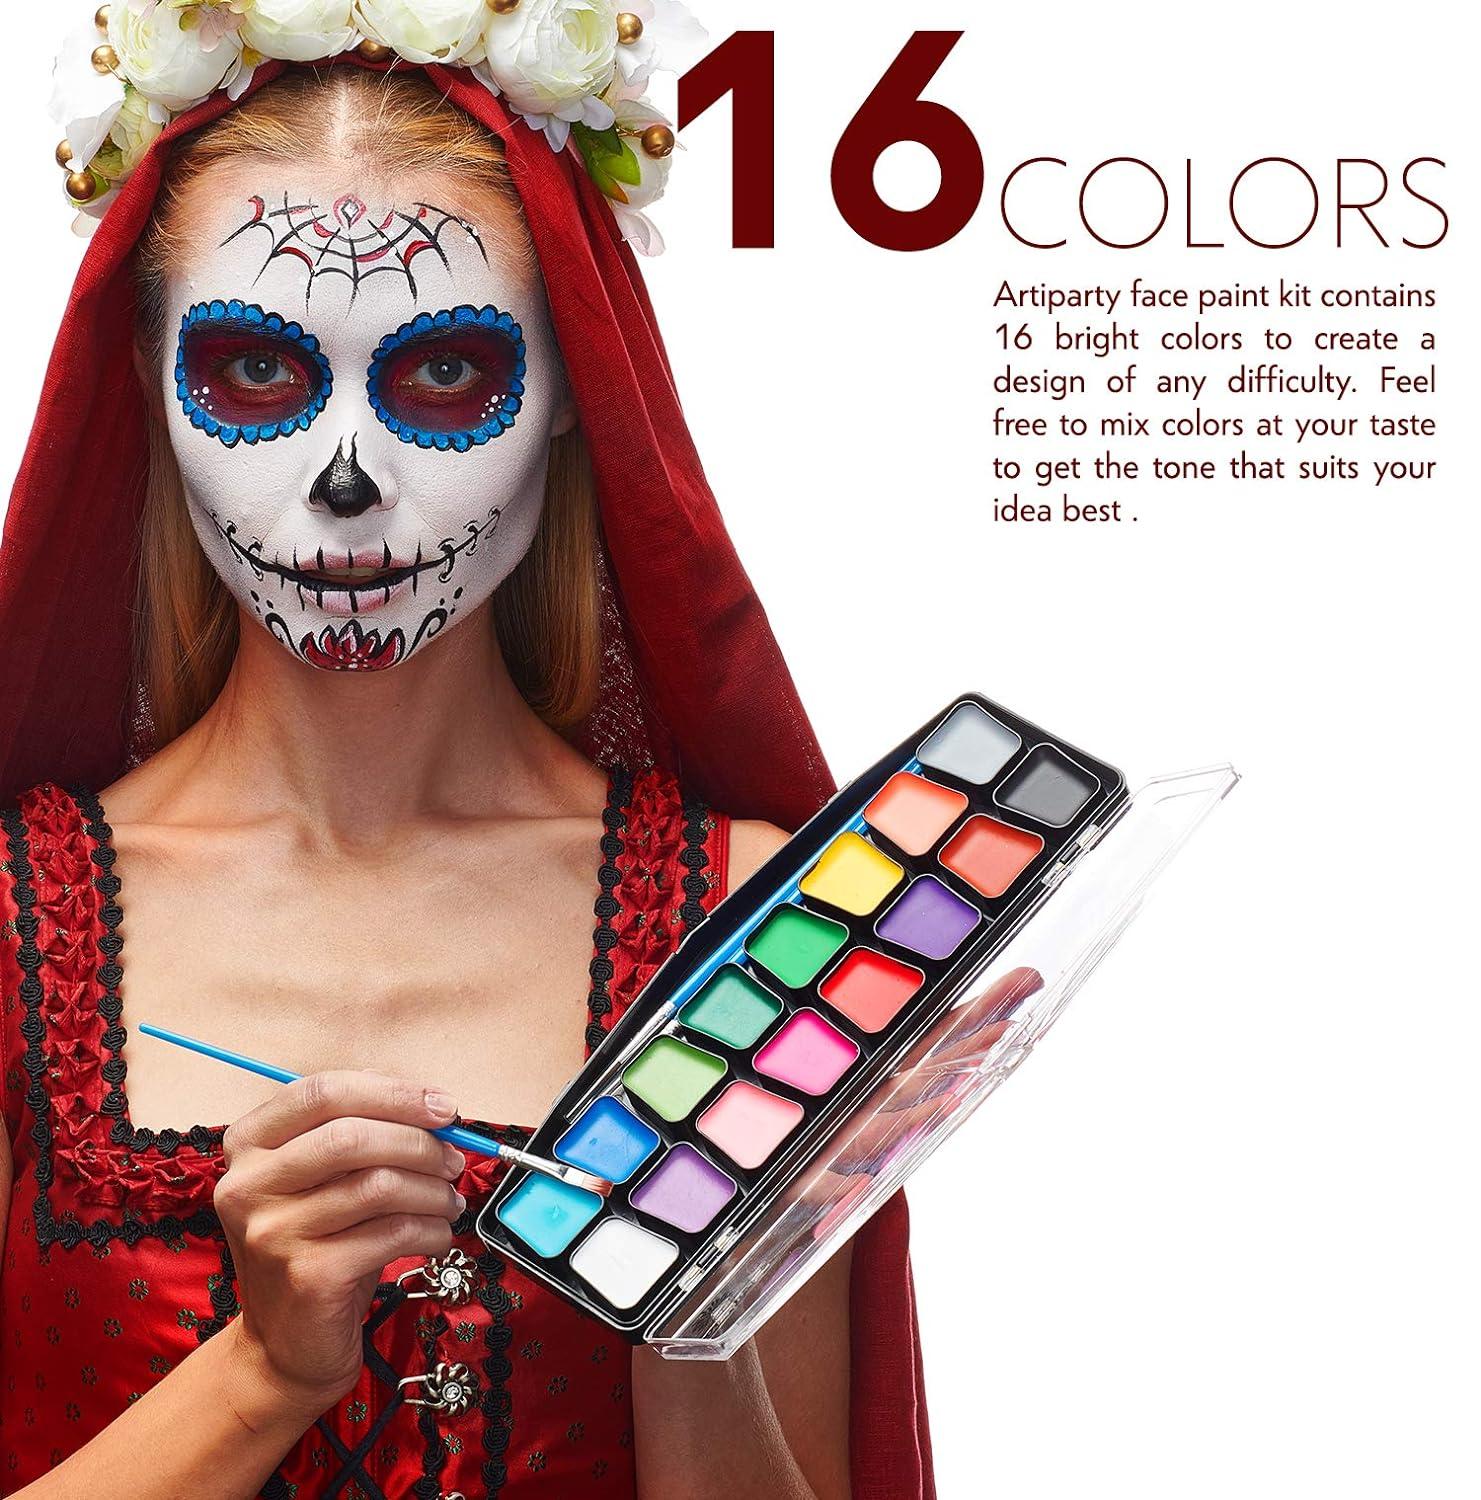 Face Paint Kit Easy to Apply & Remove Dermatologically Tested